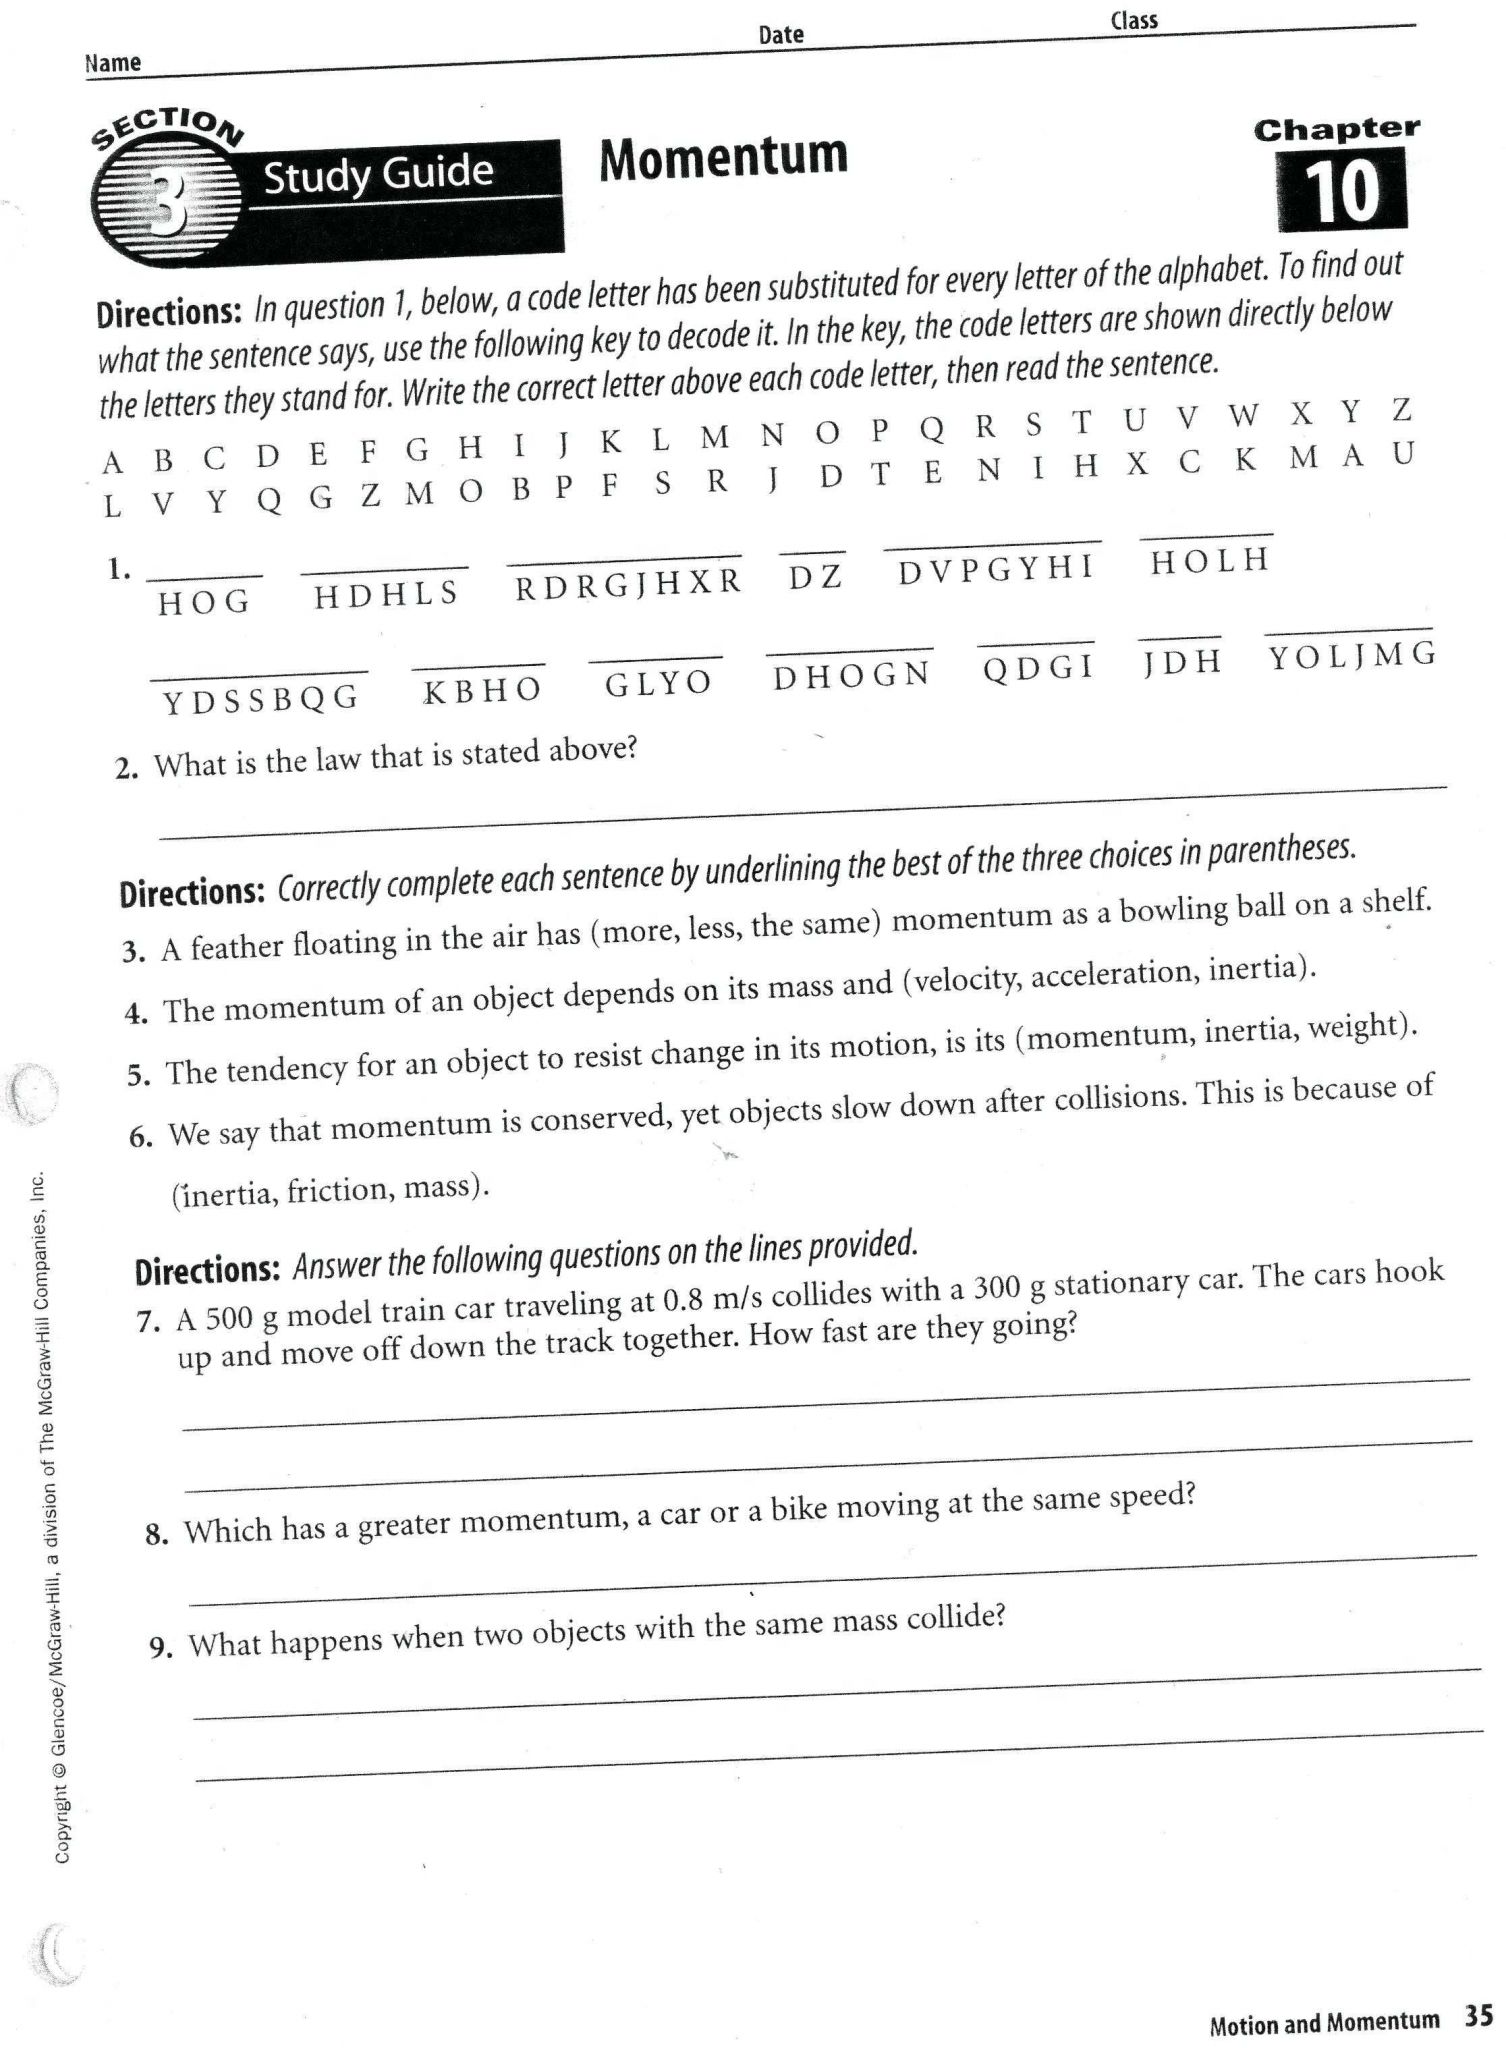 Mcgraw Hill Networks World History and Geography Worksheet Answers as Well as the Mcgraw Hill Panies Worksheet Answers World History Gallery